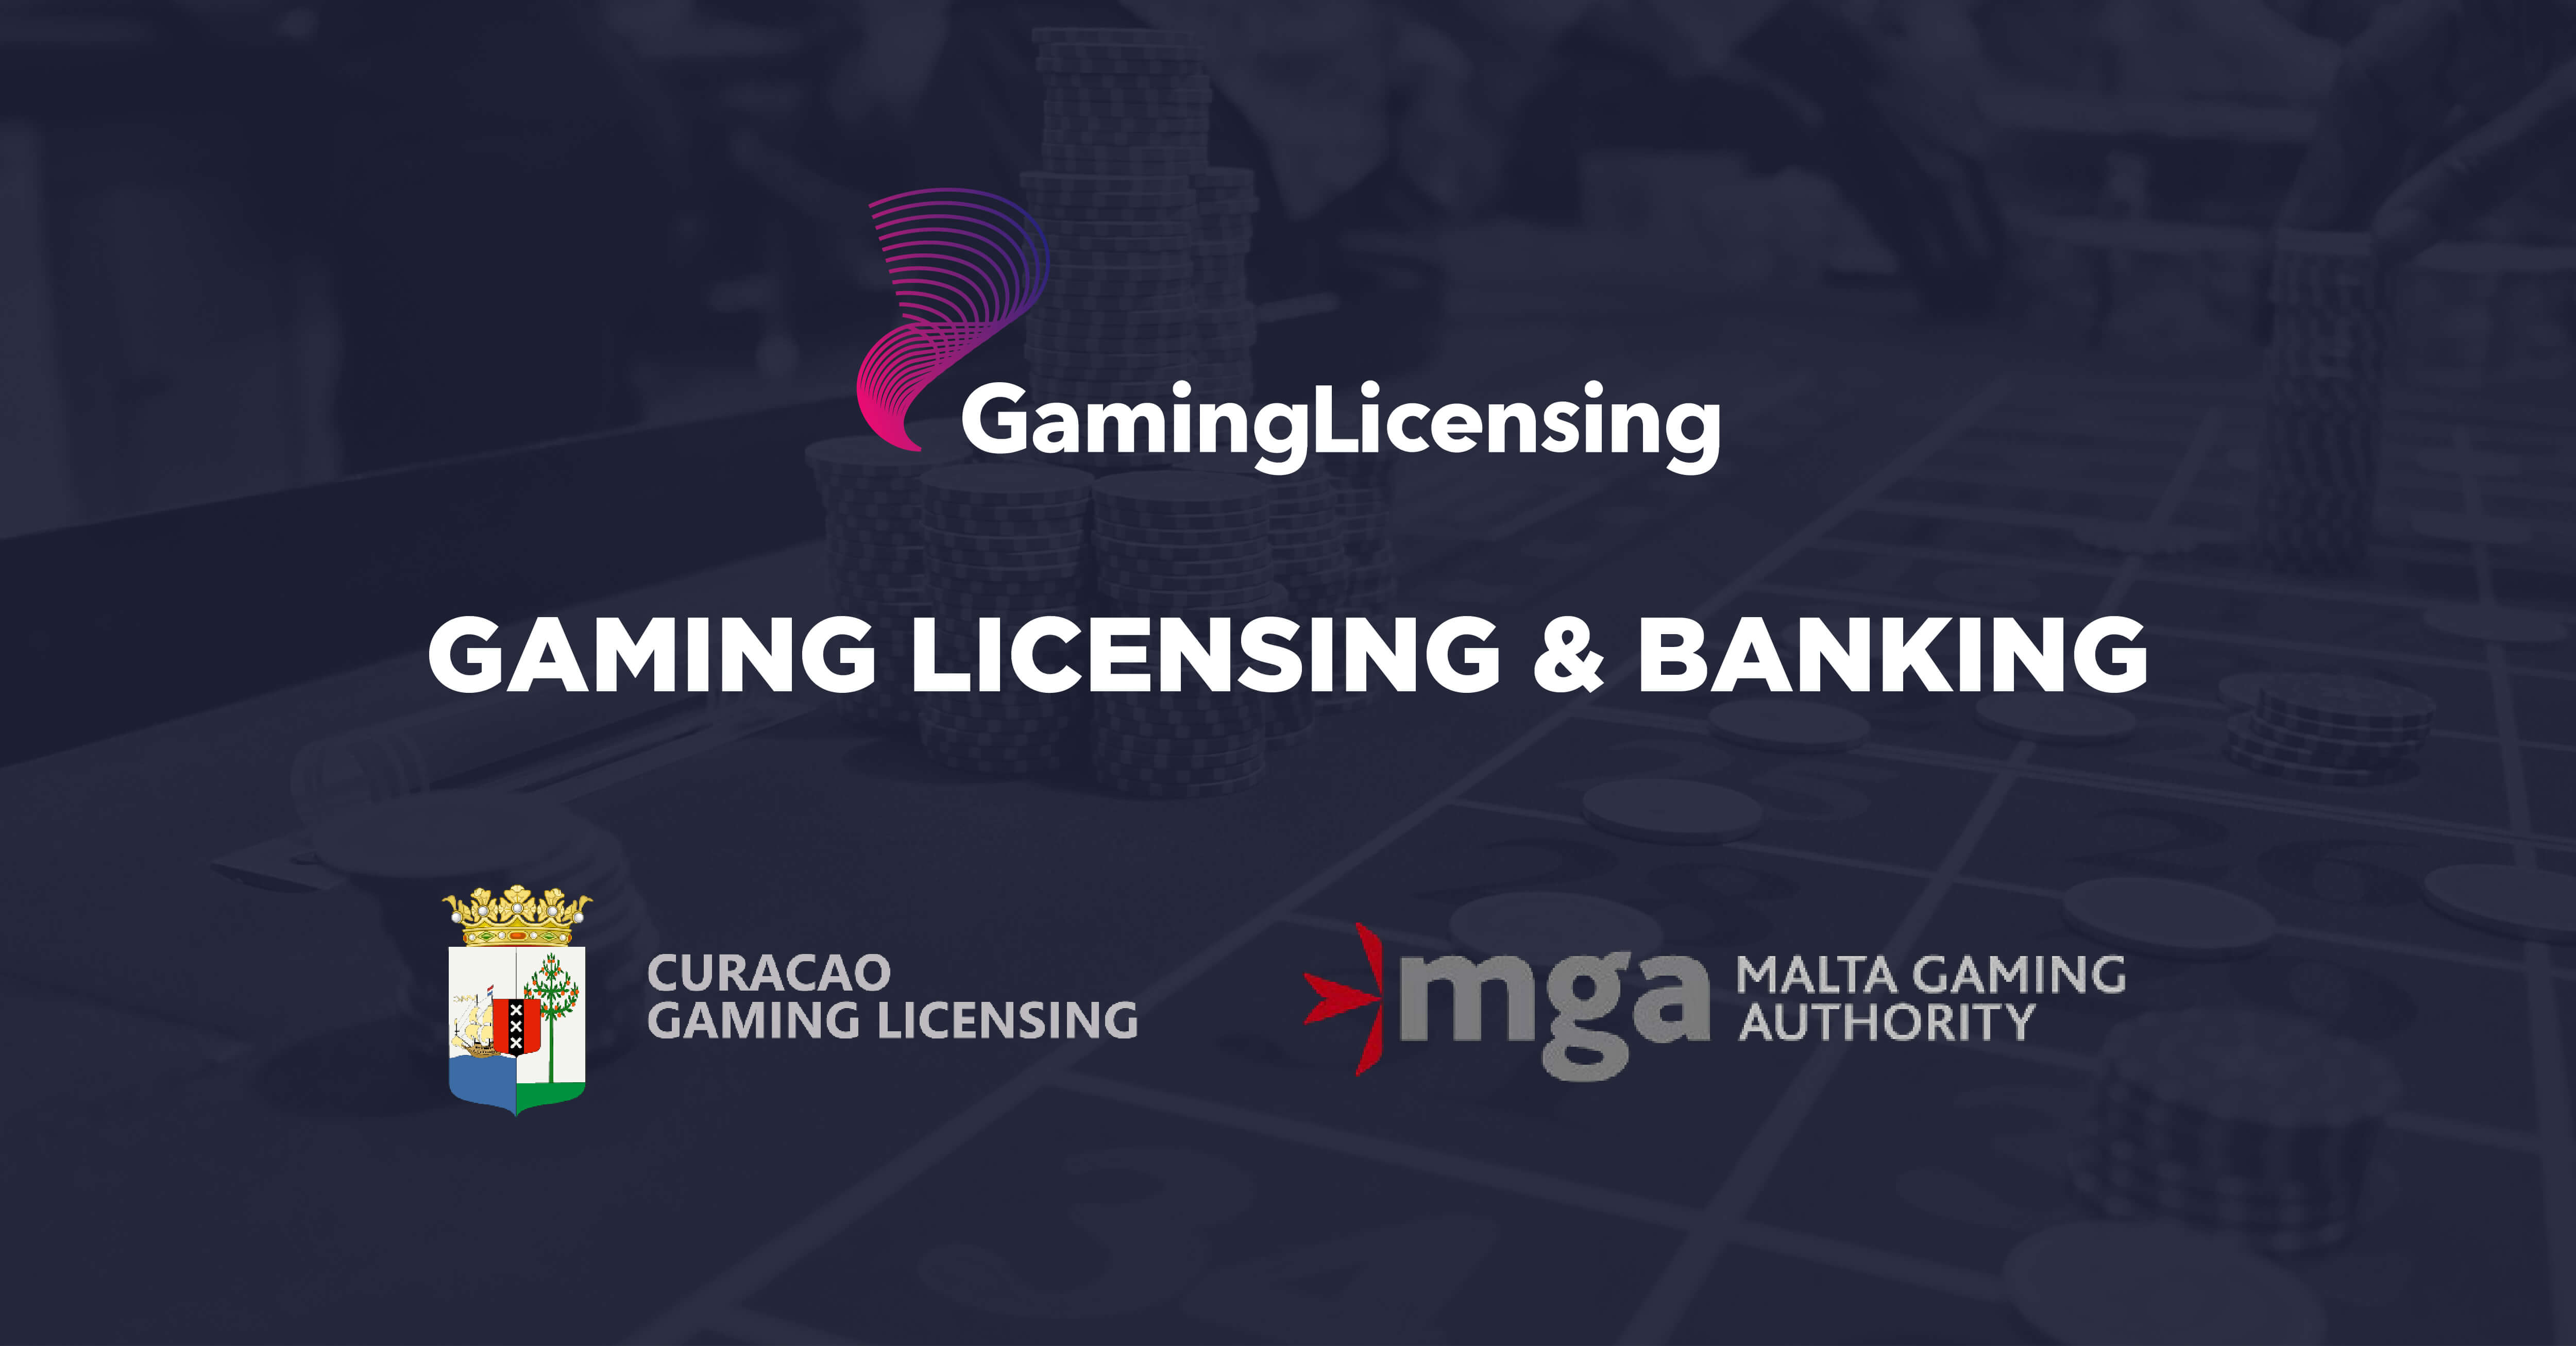 Game license. Curacao Gaming License. Лицензия Кюрасао. Curacao gambling License. Gaming Curacao лицензия.